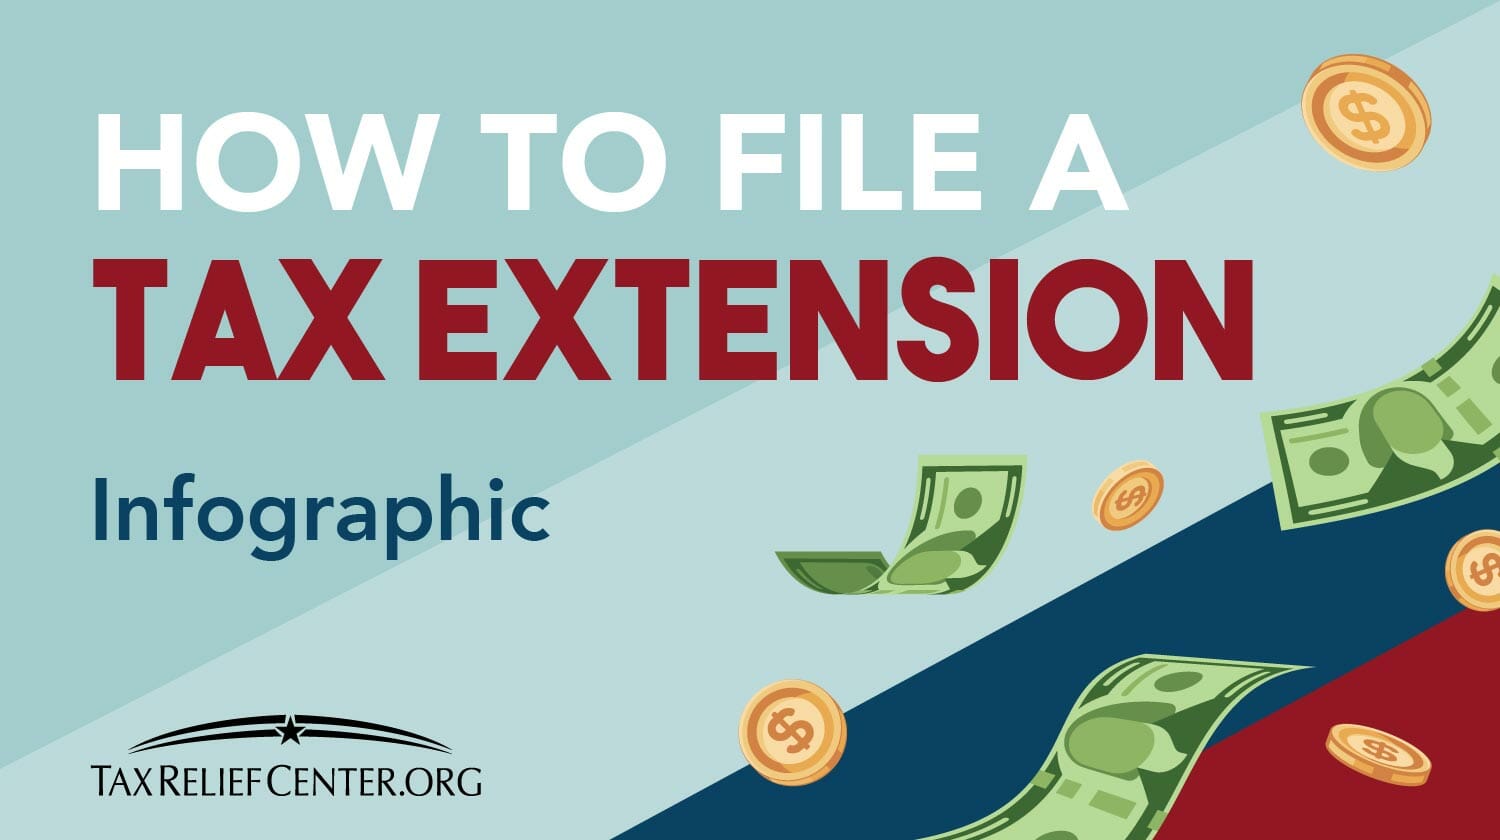 Feature | tax form 4868 | Filing Tax Extension | A Complete Guide | turbotax extension | how to file a tax extension [INFOGRAPHIC]